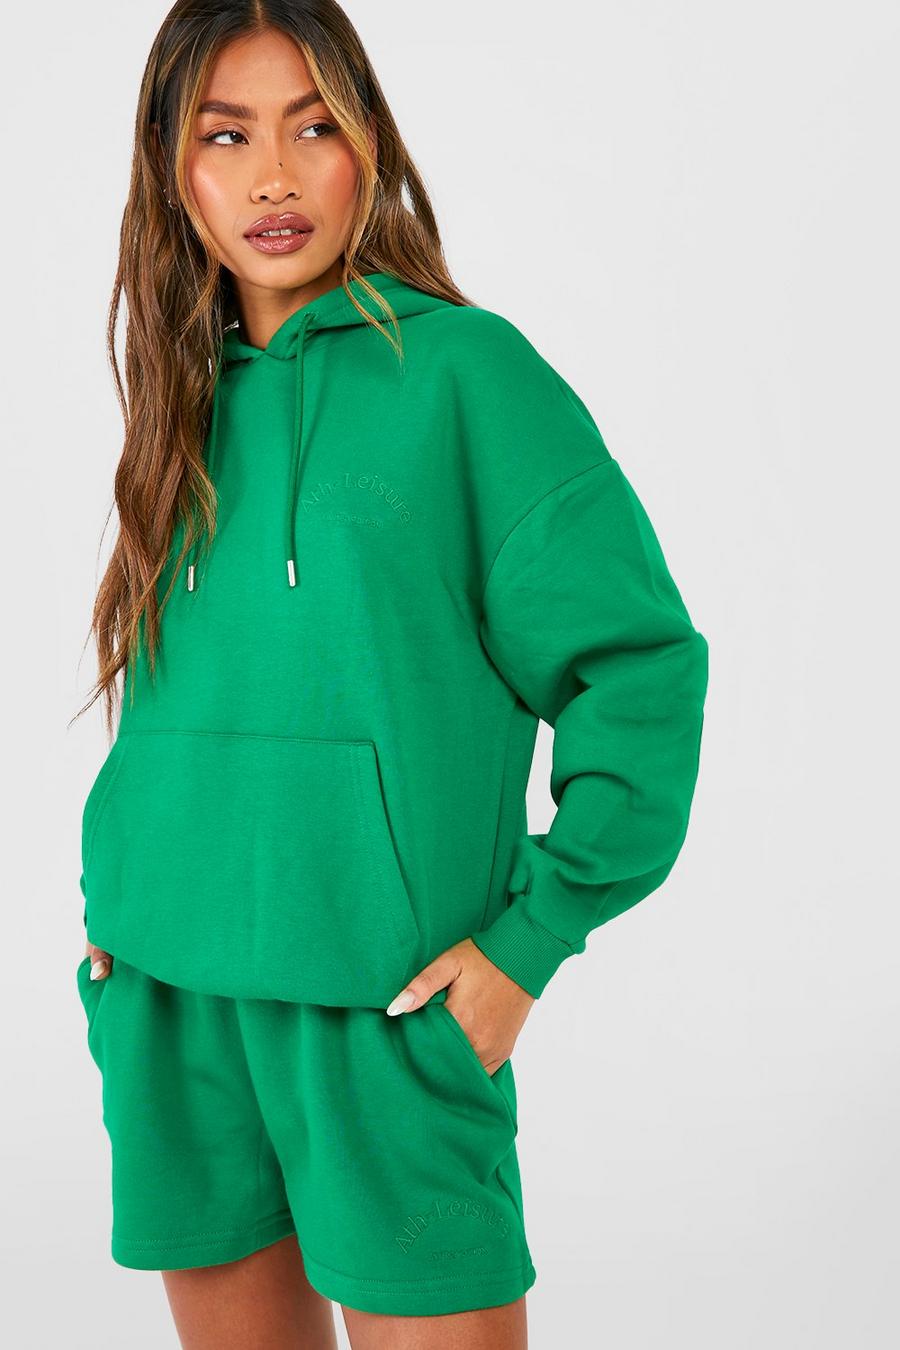 Green Ath Leisure Embroidered Hooded Short Tracksuit